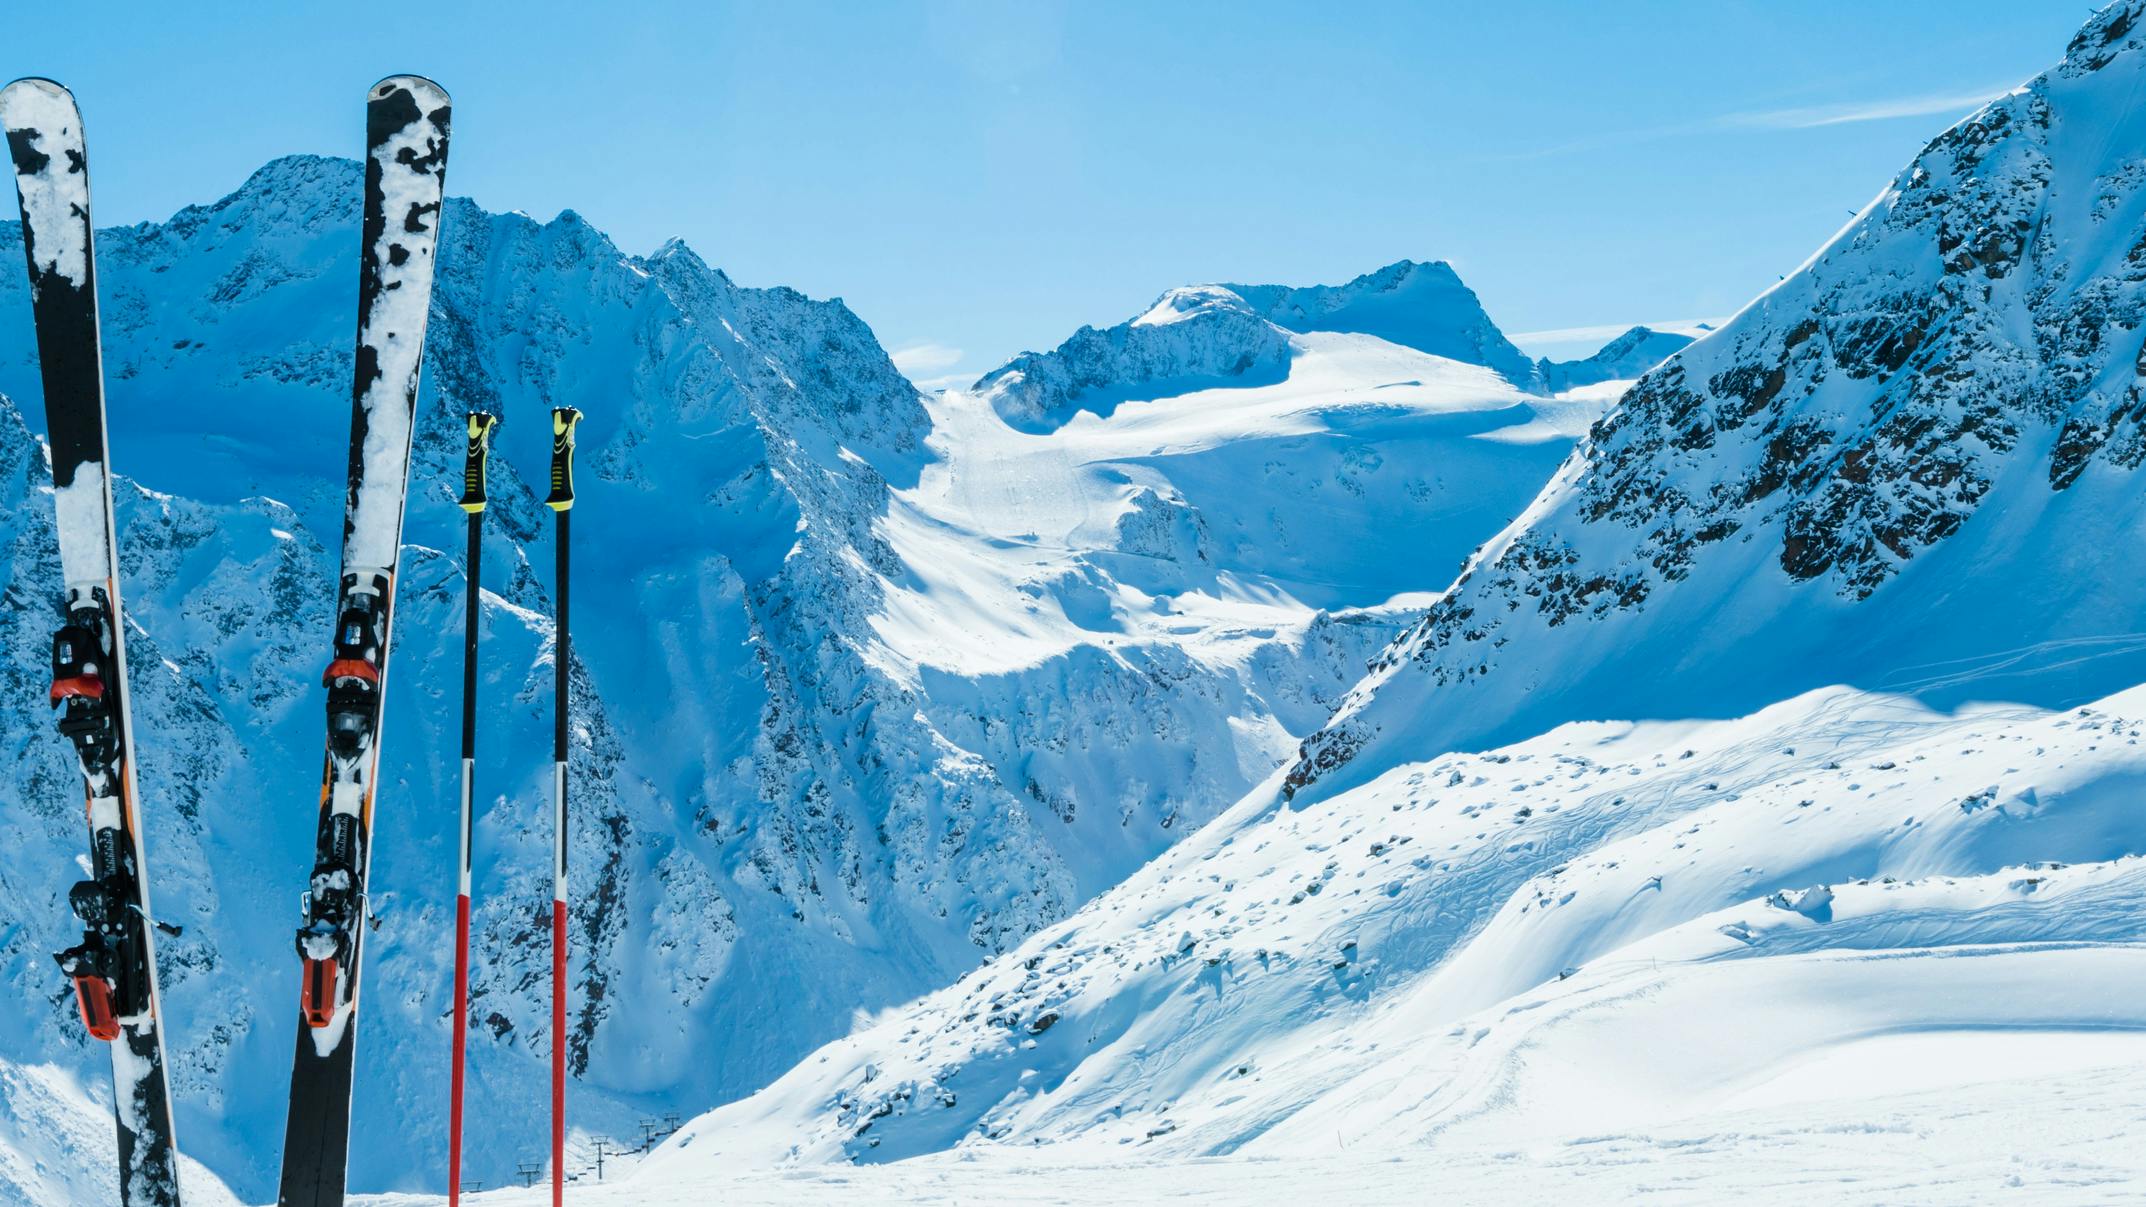 A pair of skis in the snow with mountains in the background